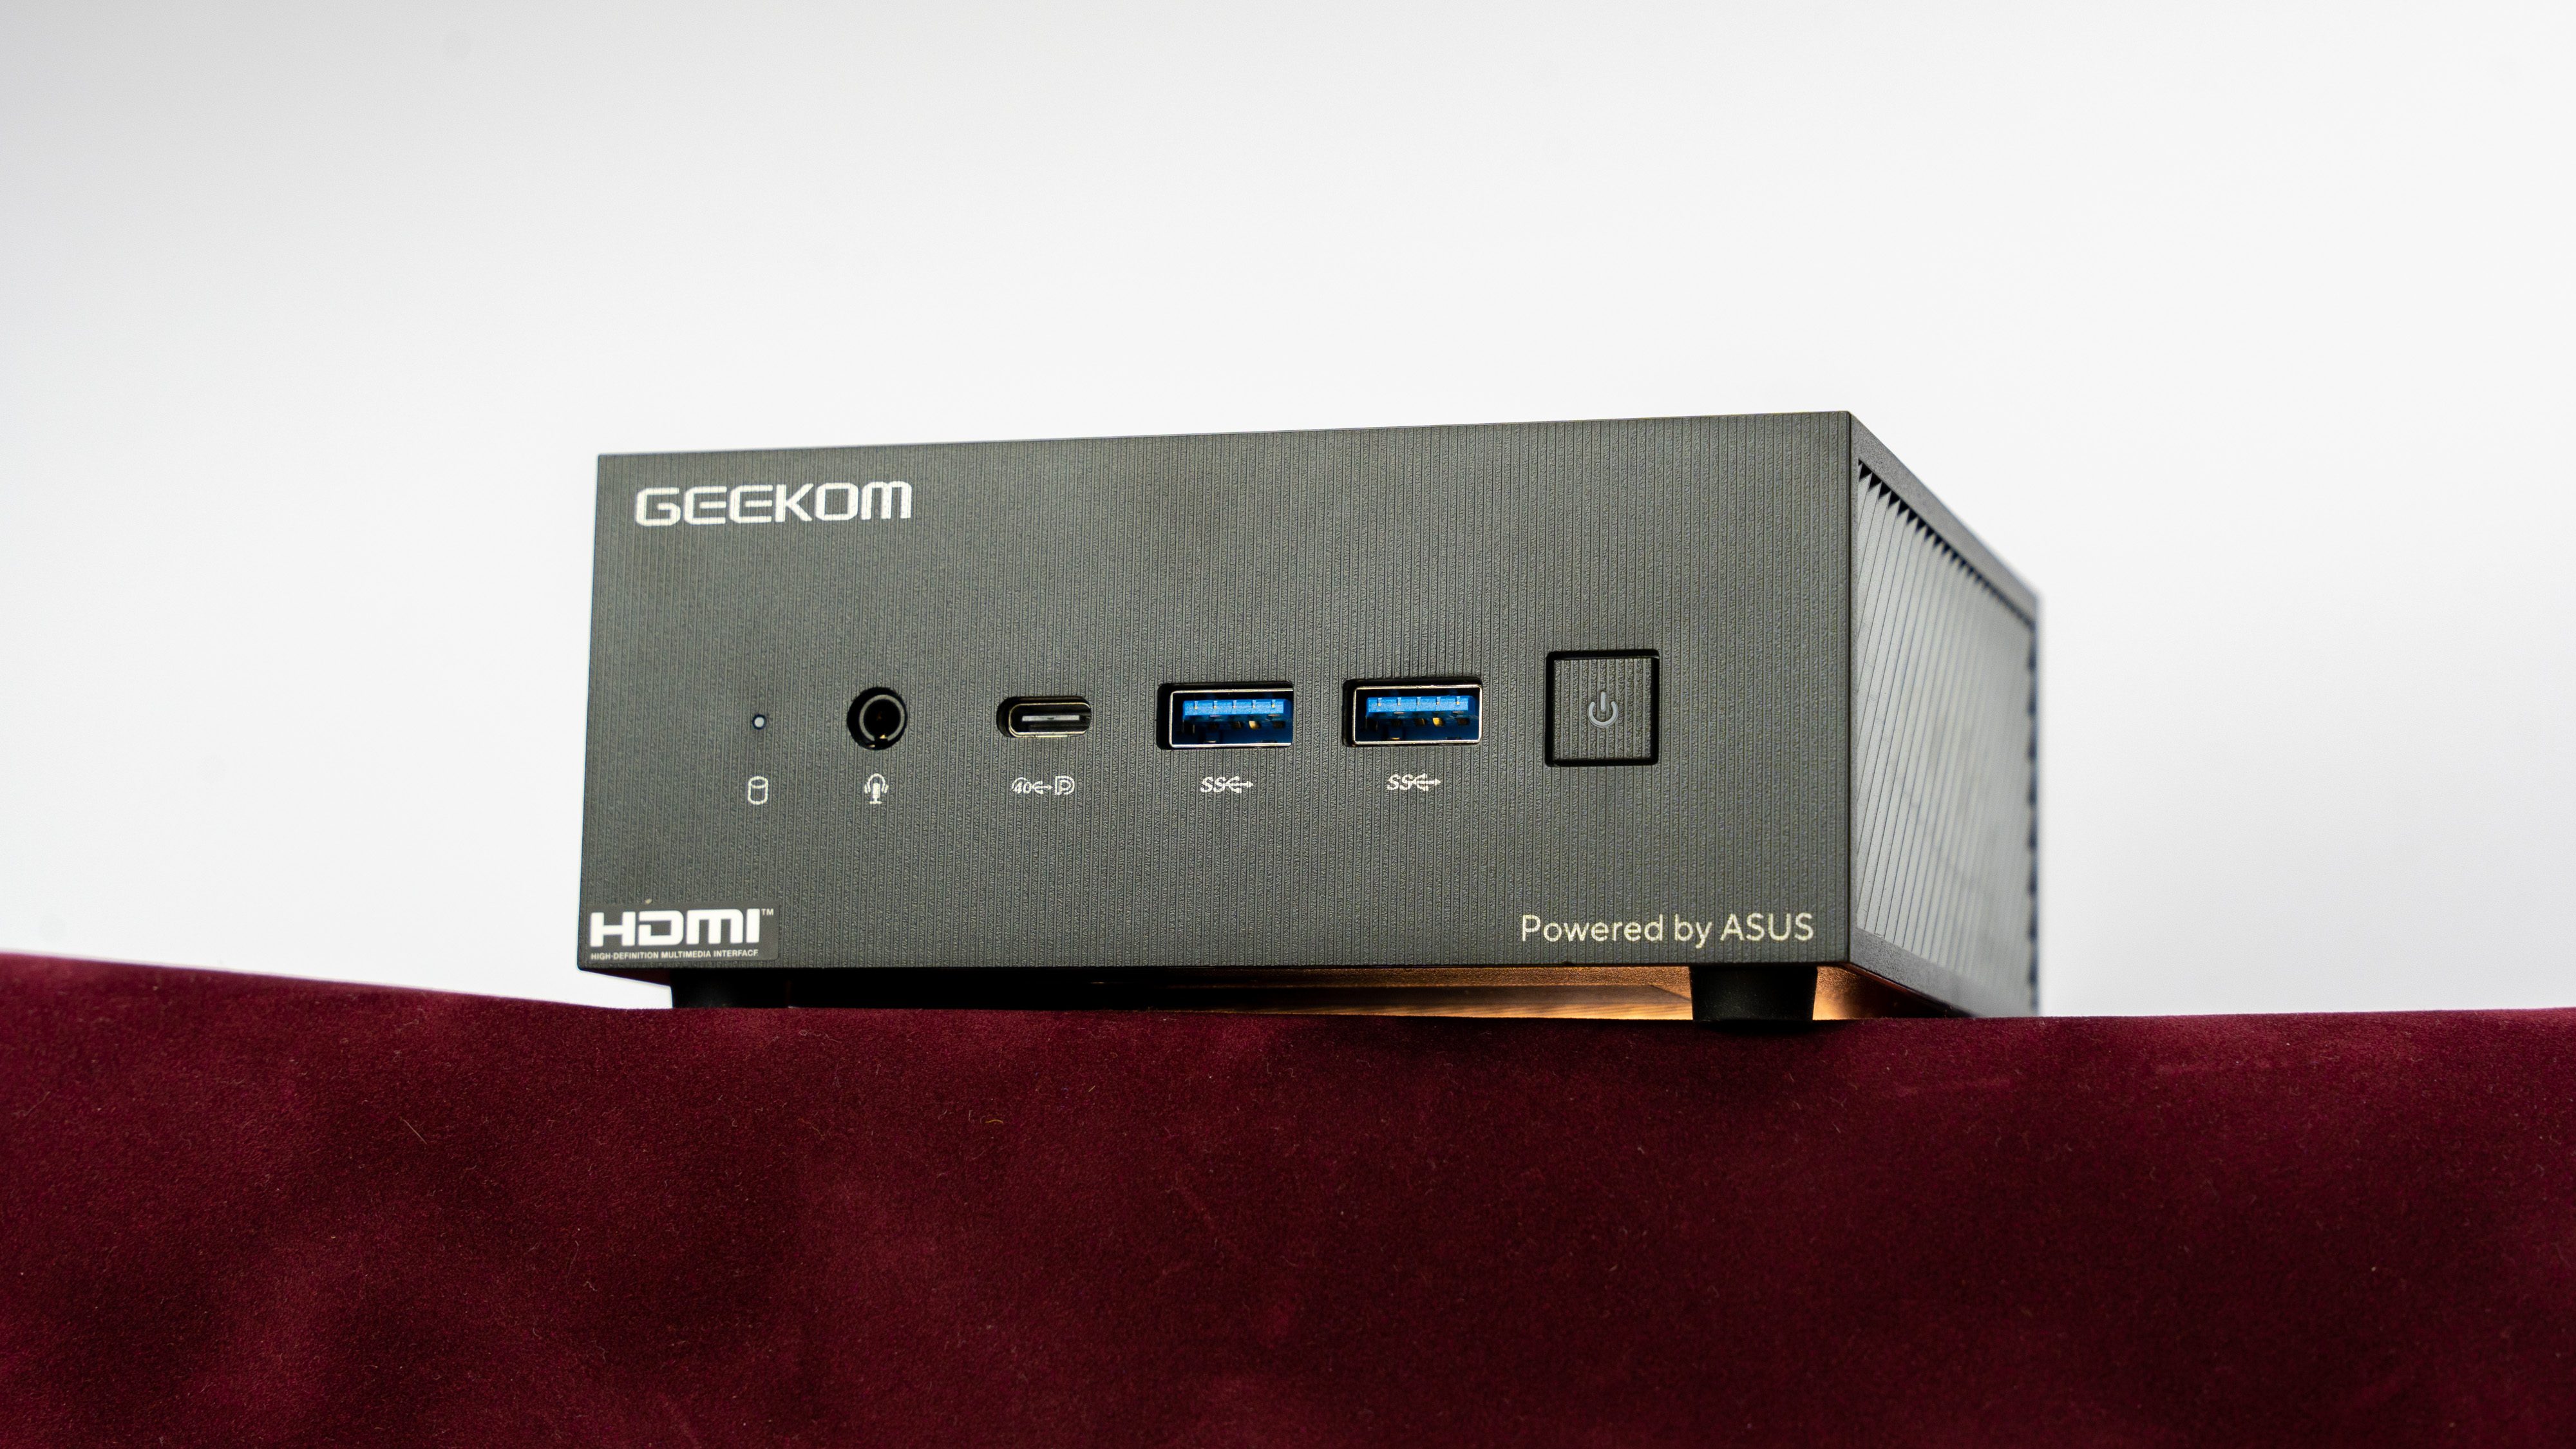 Geekom Mini PC packs a lot into a very small case